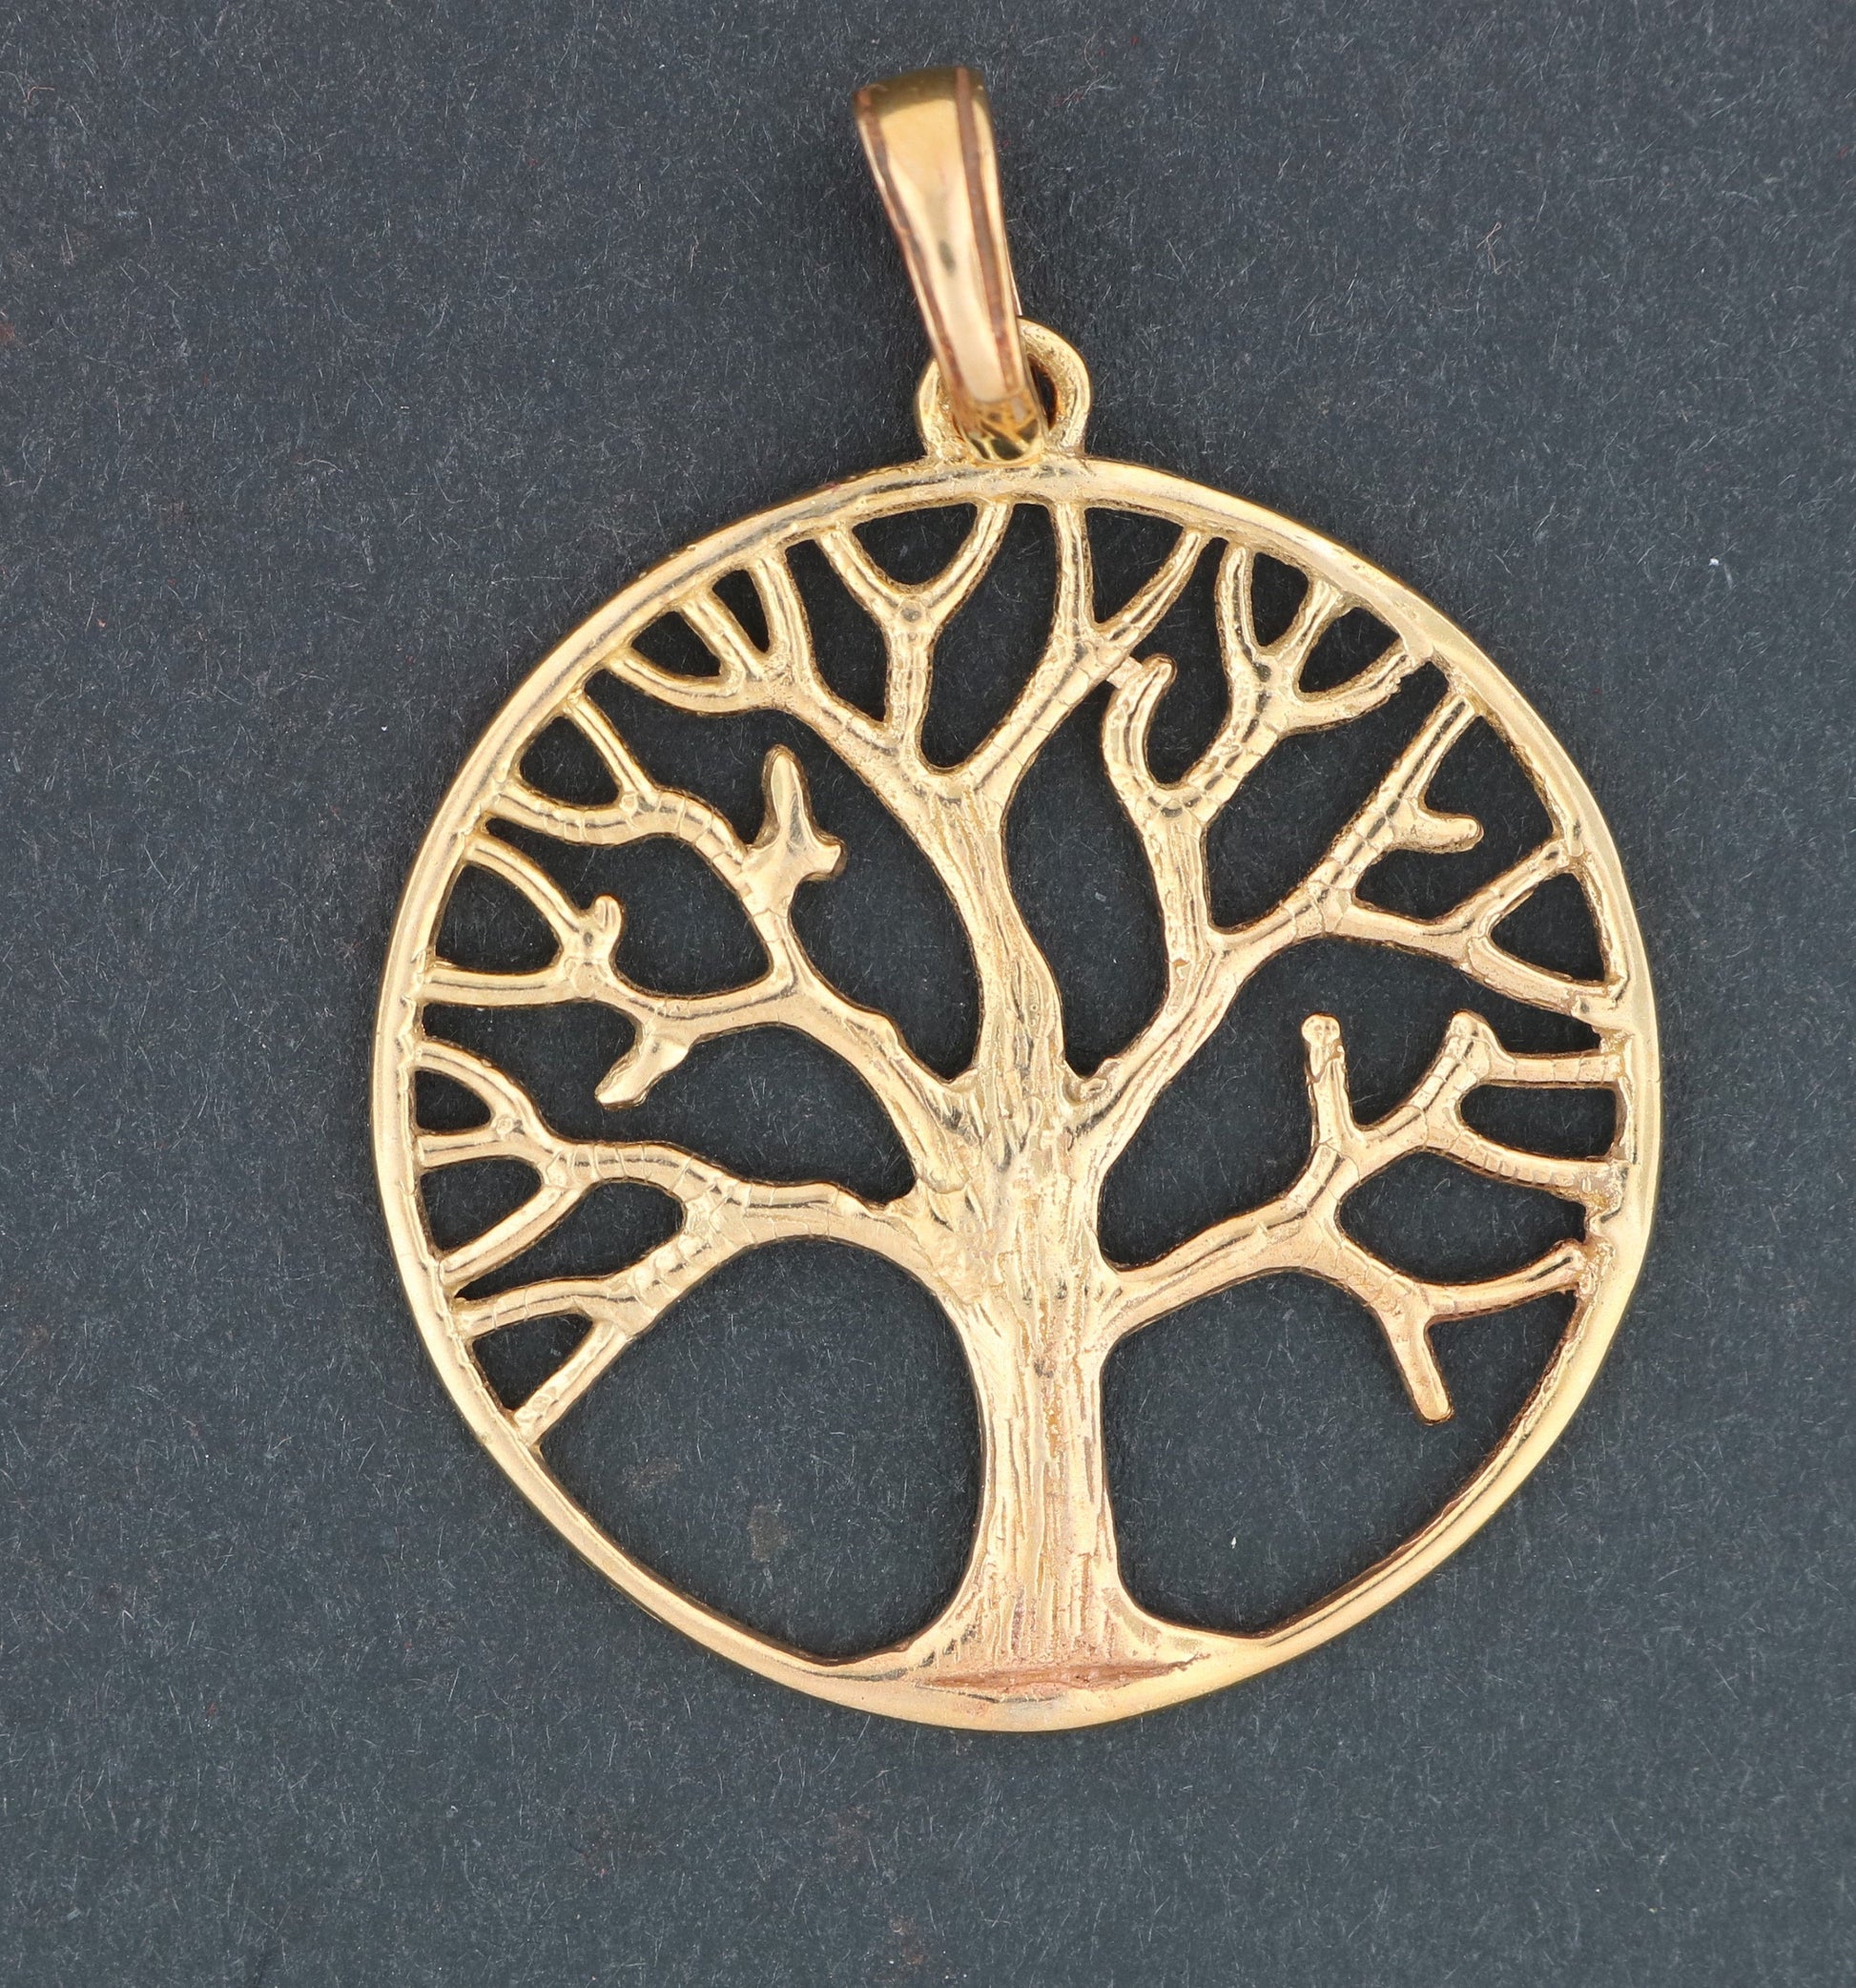 Tree of Life Pendant in Sterling Silver or Antique Bronze, Yggdrasil Tree Pendant, Wicca Silver Jewelry, Silver Wican Jewelry, Bronze Wiccan Jewelry, Silver Pagan Pendant, Bronze Pagan Pendant, Silver Esoteric Jewelry, Bronze Esoteric Jewelry, Silver Tree Of Life Pendant, Bronze Tree Of Life Pendant, Yggdrasil Silver Pendant, Yggdrasil Bronze Pendant, Silver Witch Pendant, Bronze Witch Pendant